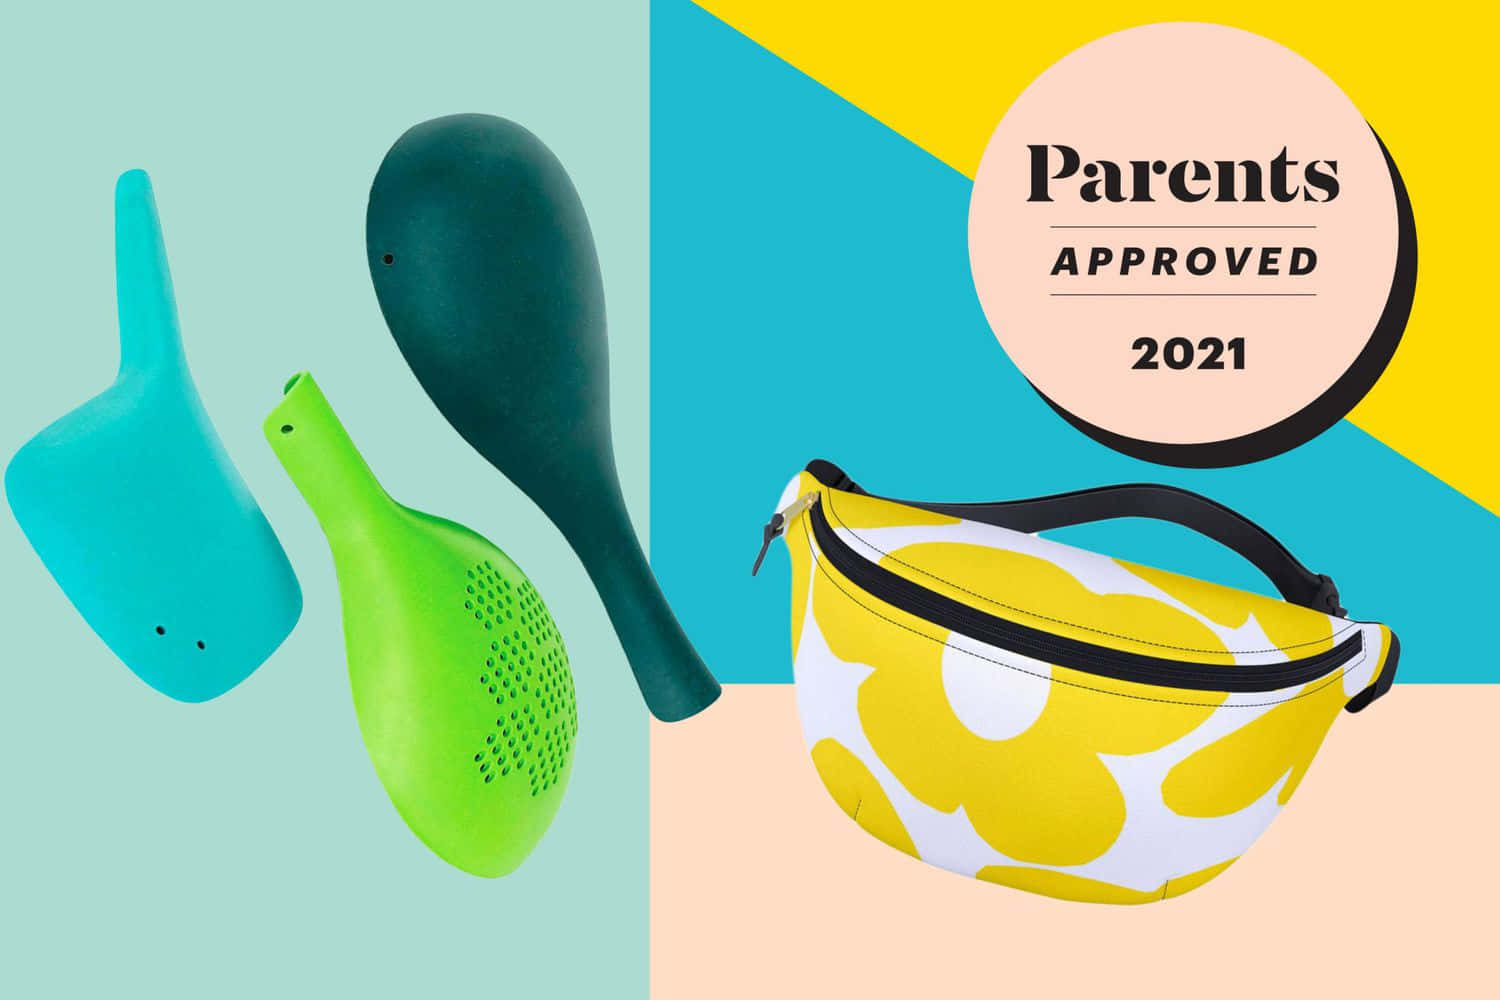 Parents Approved 2021 - A Bag With A Toothbrush And A Bottle